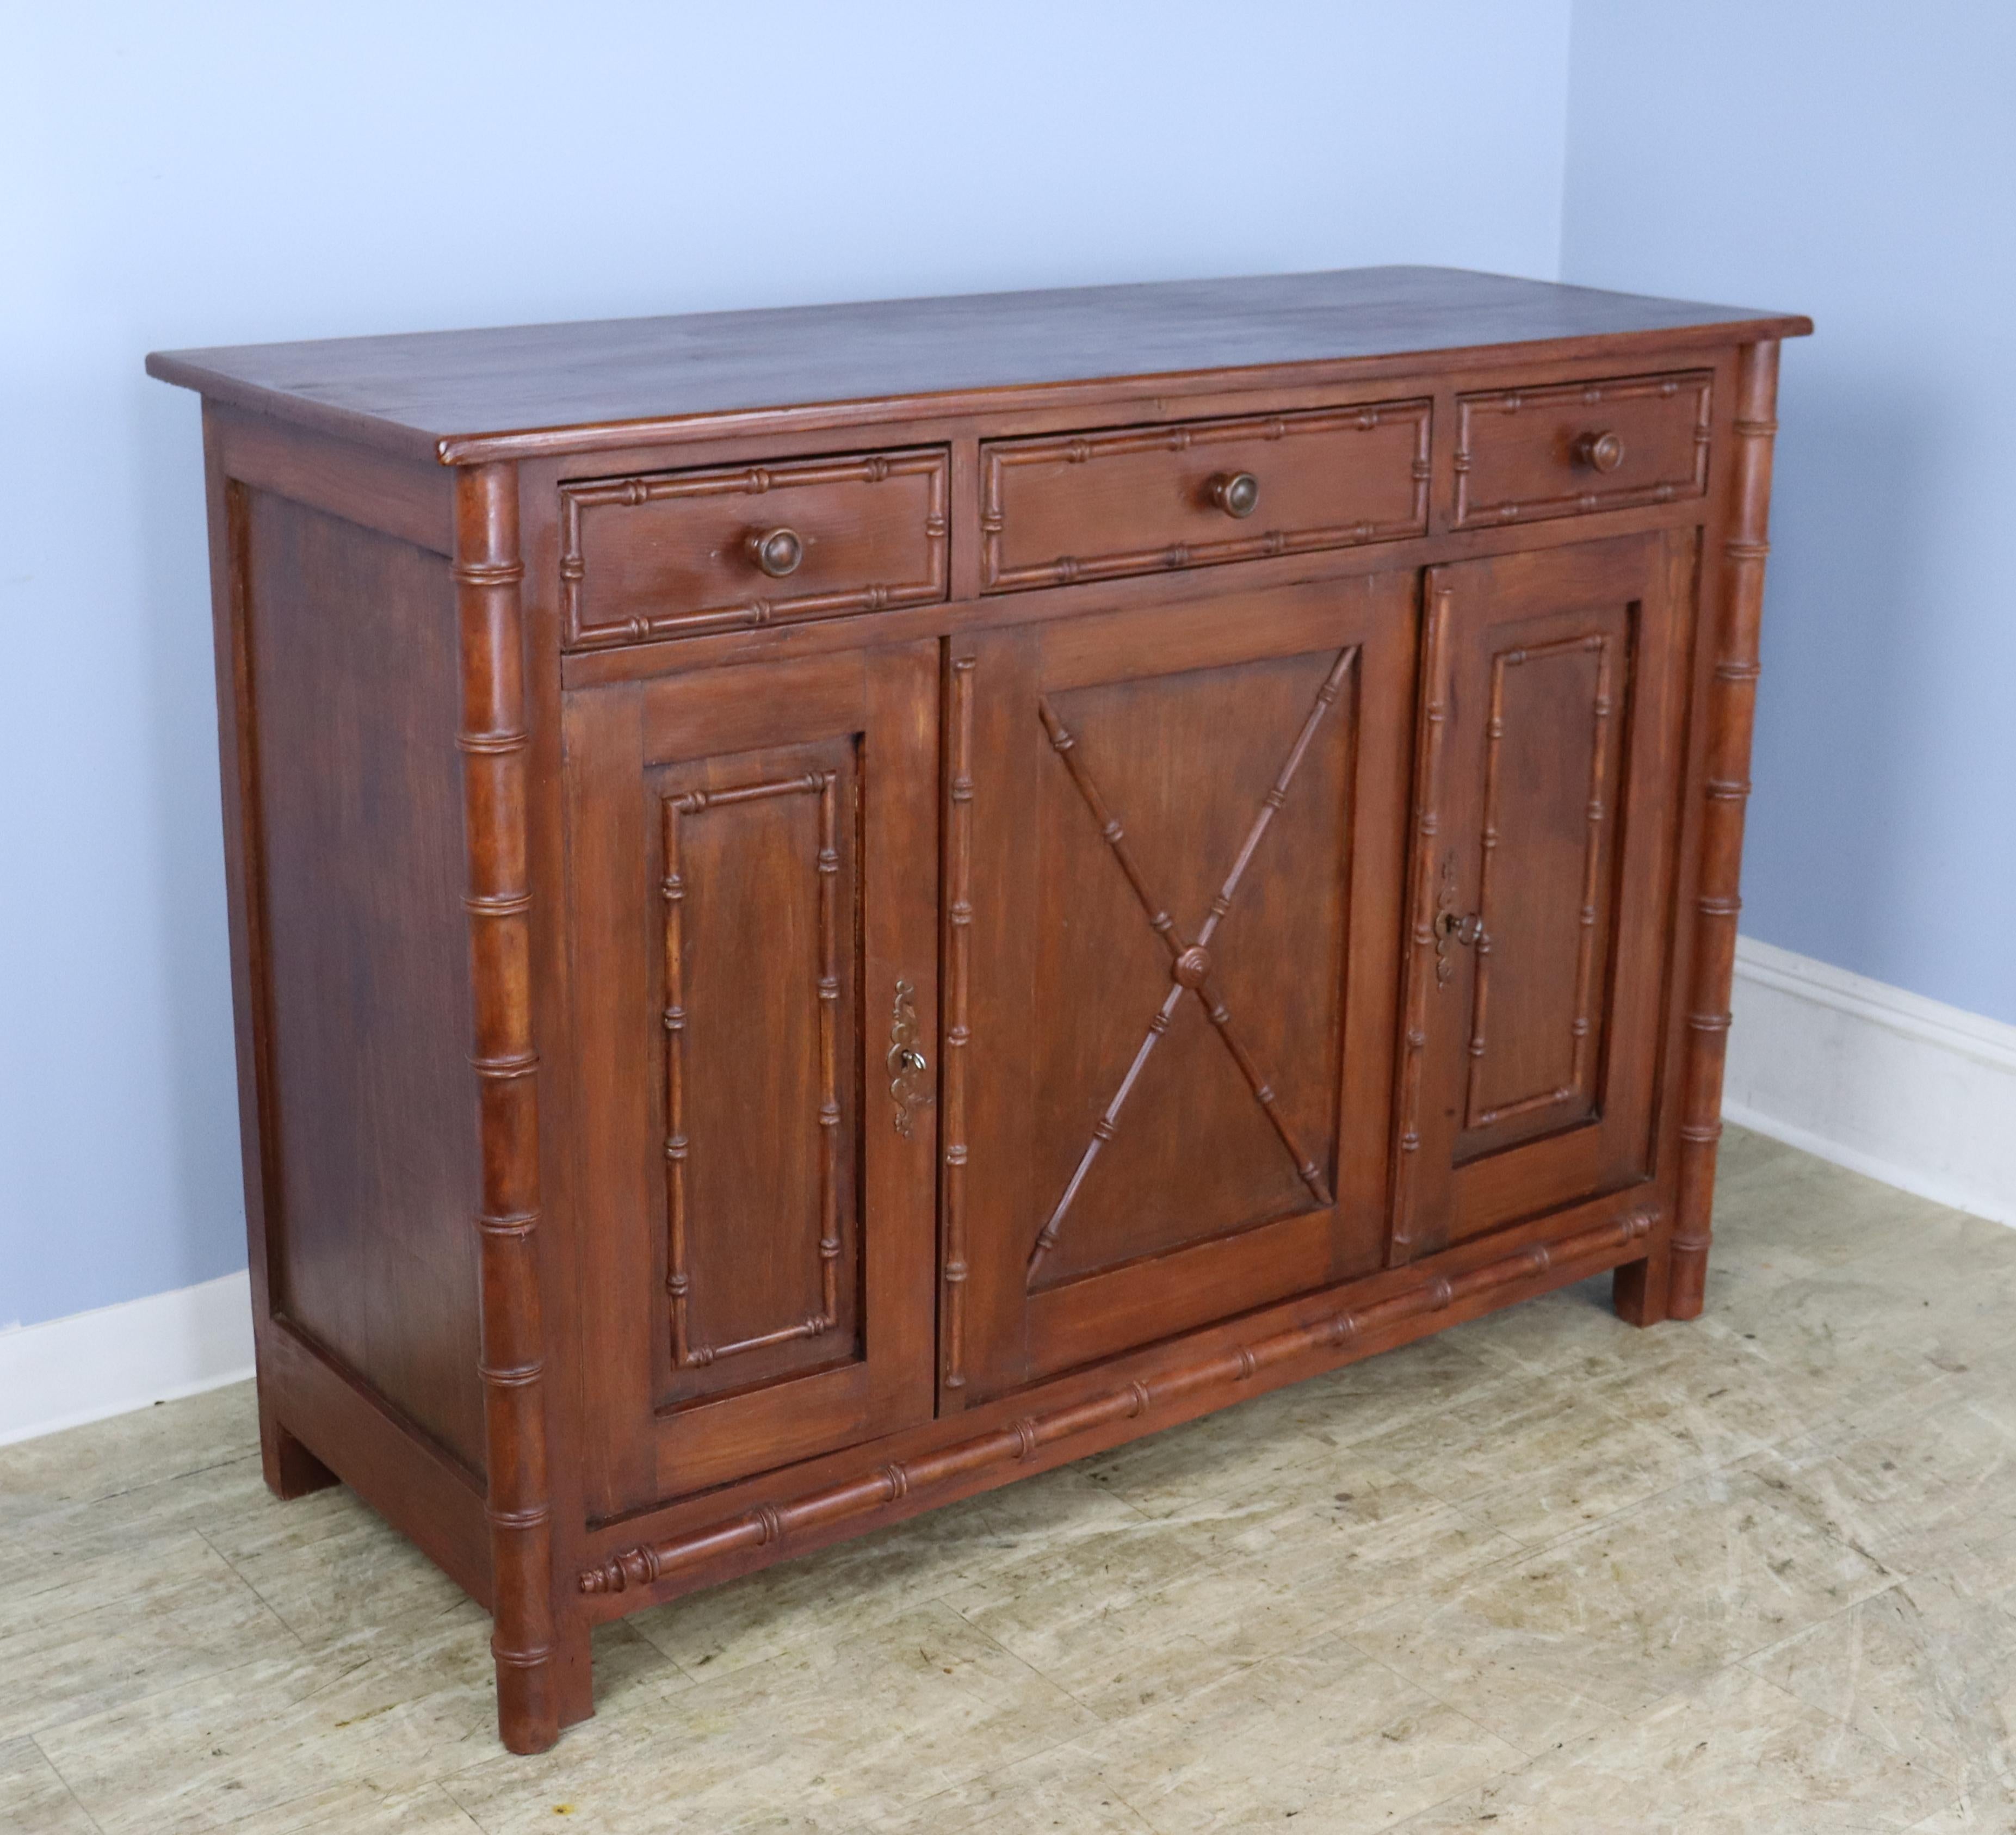 A three door enfilade or buffet with three compartments and a non-adjustable interior shelf.  Both doors lock easily with a key, though the right door has a slight warp at the top, visible in the thumbnails.  The bambood trim and mouldings are